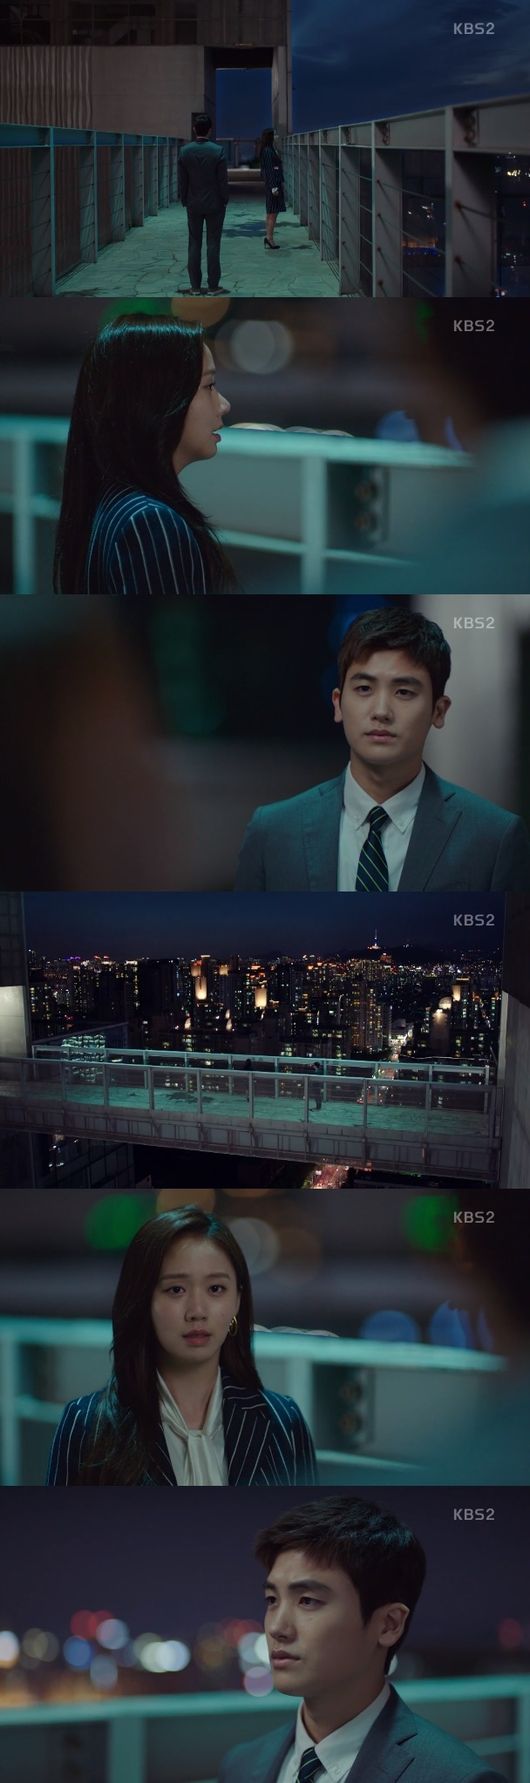 Suits Park Hyung-sik, Ko Sung-hees love line is on the brink after mock courtIn KBS2 Suits, which was broadcast on the afternoon of the 16th, Ji-na Kim (Ko Sung-hee) revealed his mind toward Park Hyung-sik.Earlier, Ko Yeon-woo faced Seo-byun (Lee Tae-sun) in a mock court watched by everyone in Gang & Ham.Ko was performing with his extraordinary brain and genius, but he was defeated with a mock court victory to protect Ji-na Kim.Ji-na Kim, who was drinking alone with Ko Yeon-woo, told her about her test trauma by comparing it to a rabbit who lives on the moon. She wanted to be a lawyer, but she could not do it because of test phobia.The story was brought out by Friend Se-hee (Lee Si-won) of Ko Yeon-woo in court, and the feelings of Ji-na Kim became intense.After the mock court, Ko Yeon-woo, who visited Ji-na Kim, apologized, Im sorry, I had only the idea of ​​a sudden victory.Id like to say, I care a lot, I care a lawyer, I dont know why, but I keep getting angry, and Im nervous, Ji-na Kim confessed.Ji-na Kim asked, I know I can not, but it is a secret that we only knew. Did you tell the friend about the rabbit?I do not know how I became a genius who turned Kim Joo-im upside down. Ko was struggling to adapt to the law firm early on because he was pretending to be a fake lawyer.The reason why Ko gave up a very important mock court victory also came from the heart for Ji-na Kim.In the original Meade of the same name, Suits, Mike Ross (Patrick J. Adams Boone) and Rachel Weisz Jane (Megan Markley Boone) develop into lovers.Beyond the middle of the season, the romance between Mike and Rachel Weisz is focused.While Ji-na Kim reveals her mind, interest in whether the love line of Ko Yeon-woo and Ji-na Kim will be drawn as well as the original work is gathered.Capture the Suits broadcast screen.